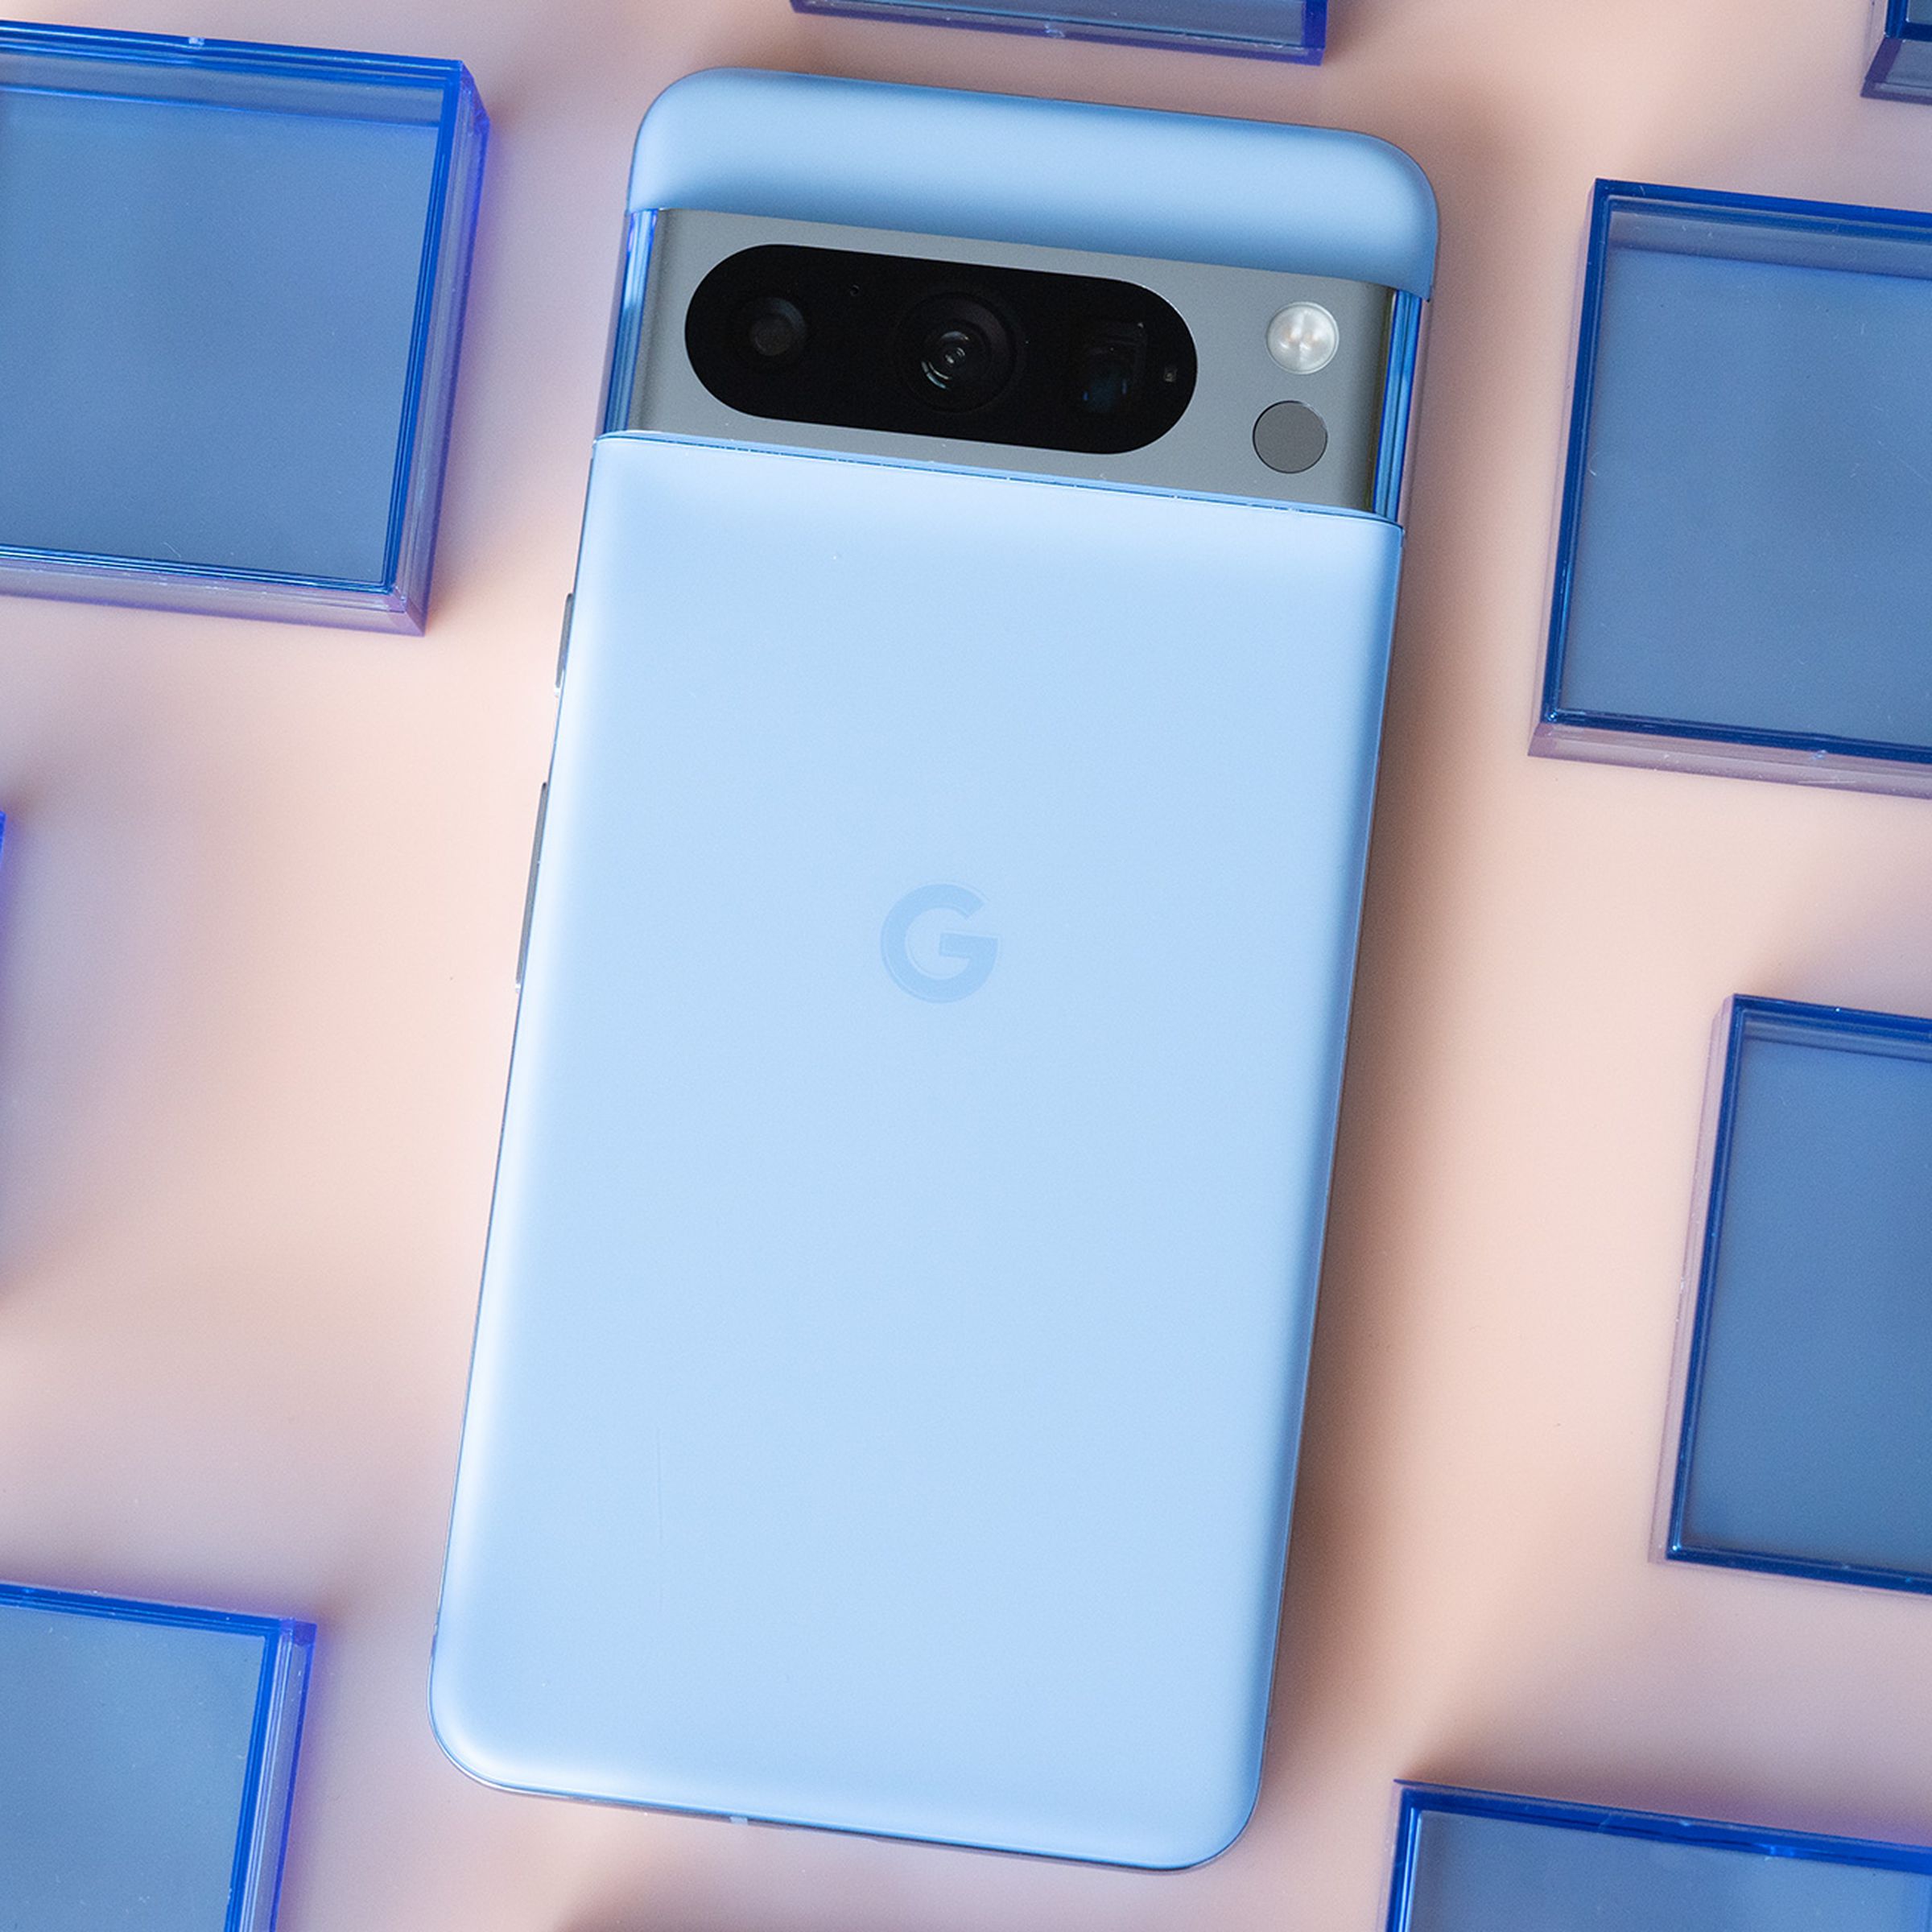 Google Pixel 8 Pro in bay blue on a light pink background surrounded by blue plastic squares